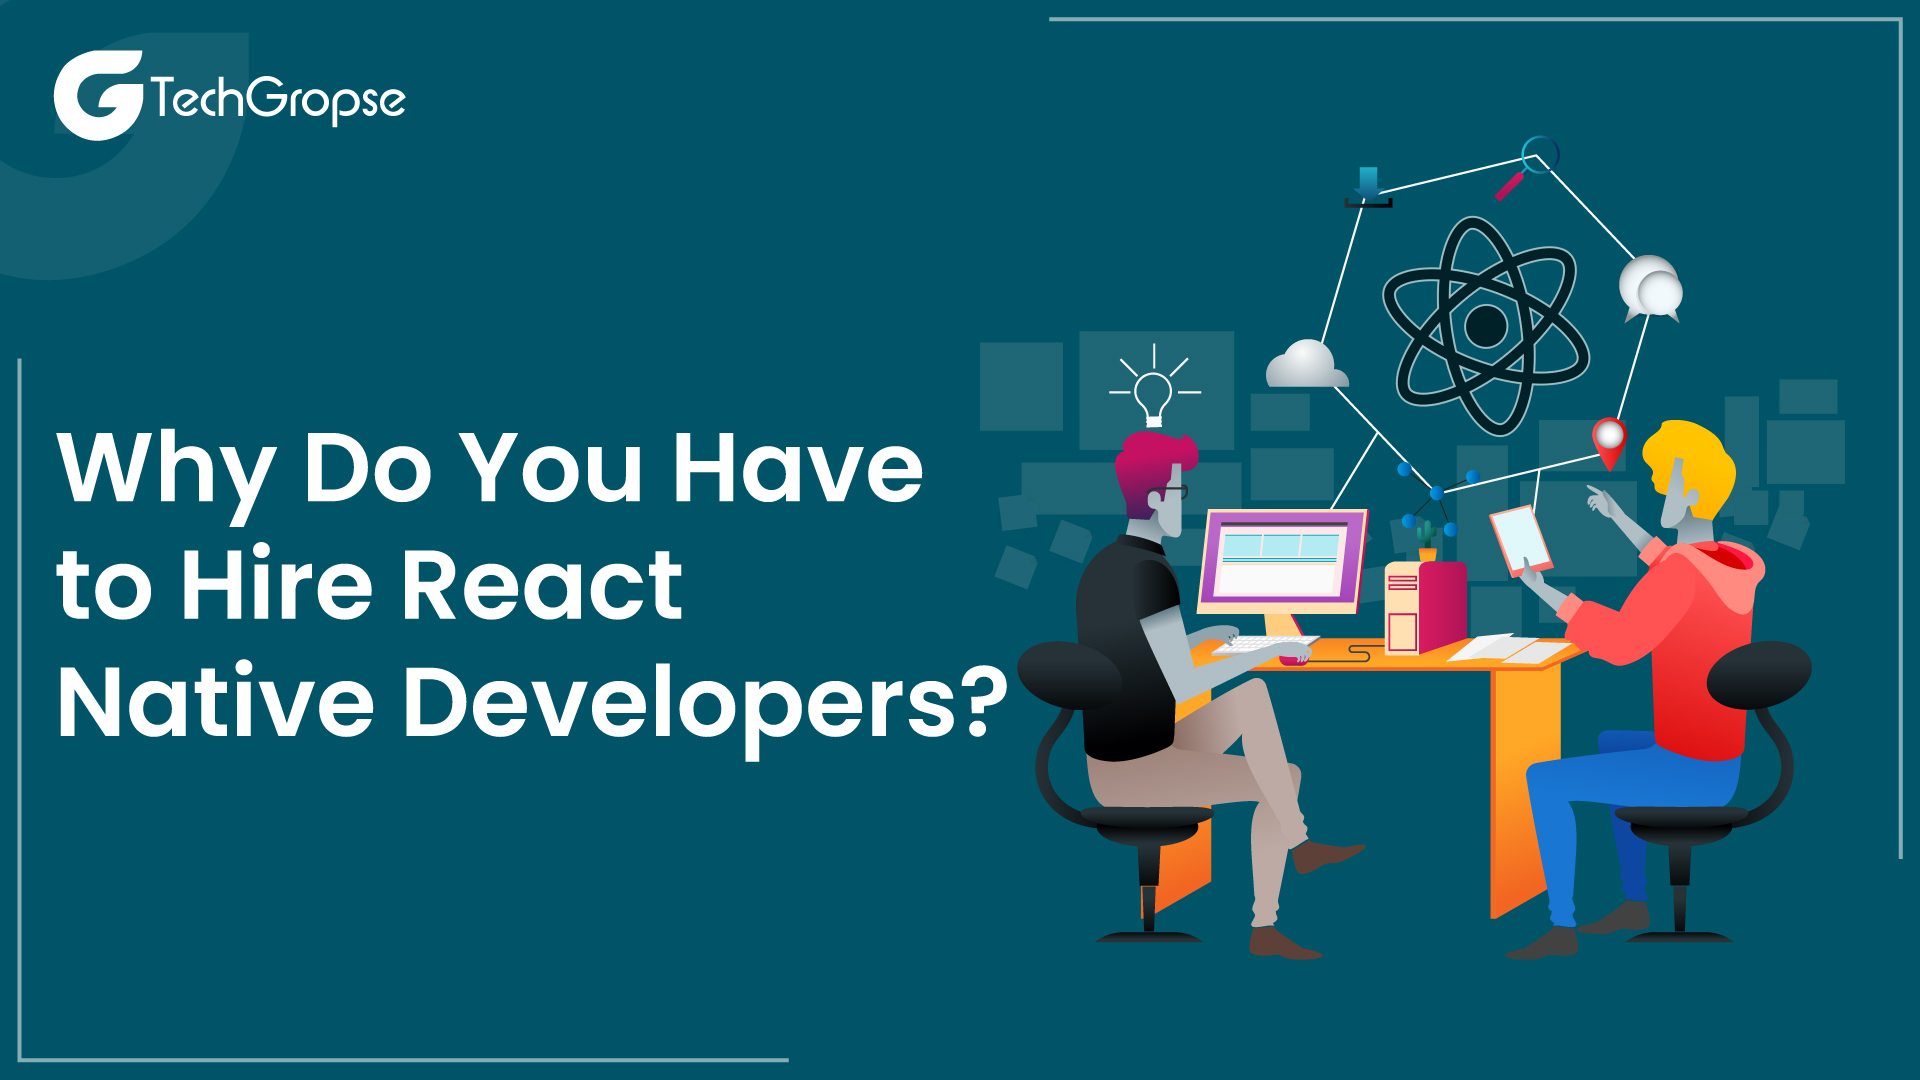 Why Do You Have to Hire React Native Developers?